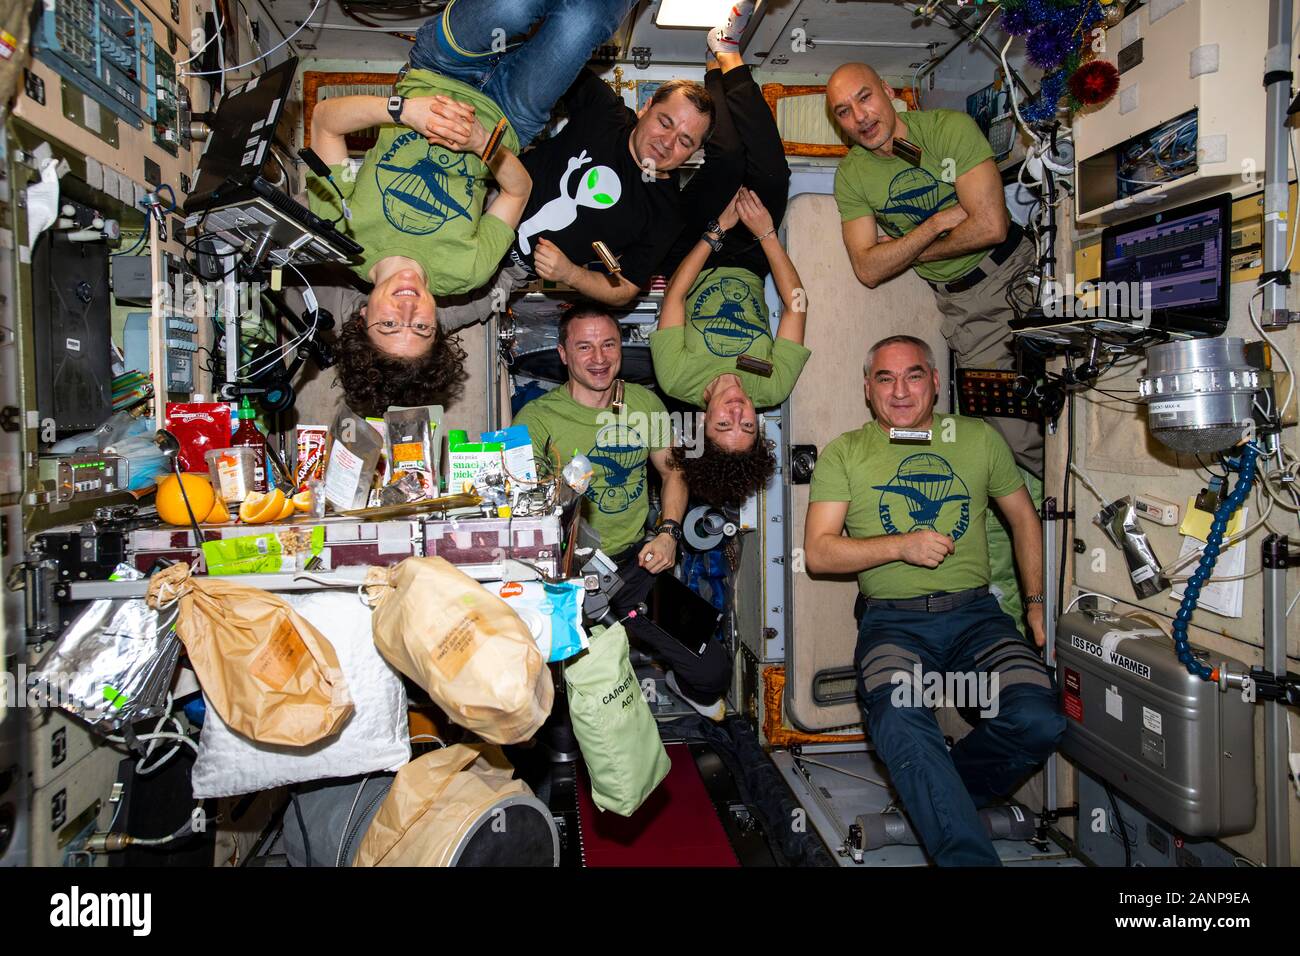 ISS - 31 Dec 2019 - The six-member Expedition 61 crew is gathered together inside the Zvezda service module for a New Year's Eve meal. Clockwise from Stock Photo